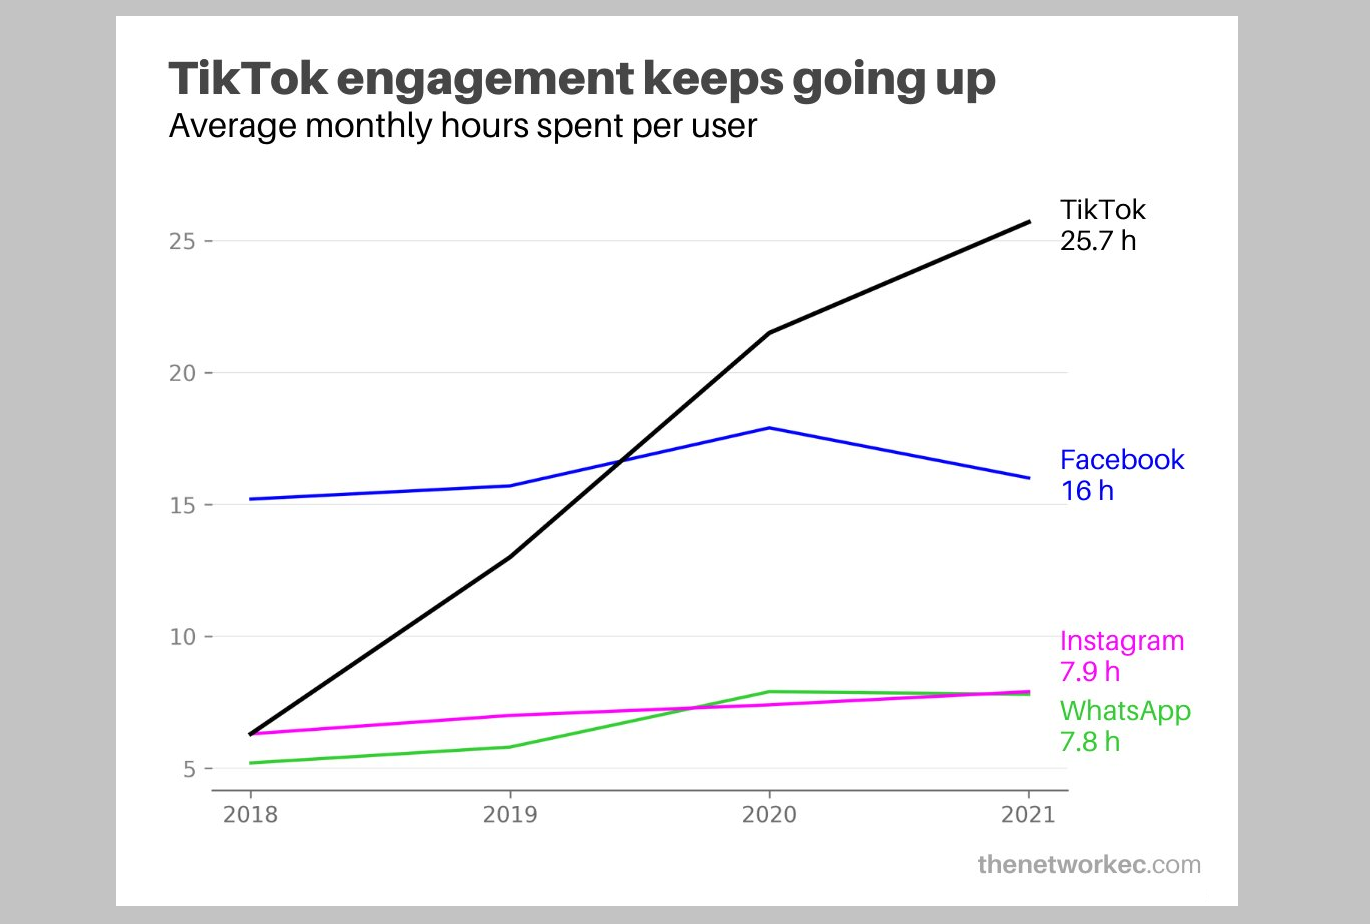 TikTok's average user watch hour time is growing as compared to